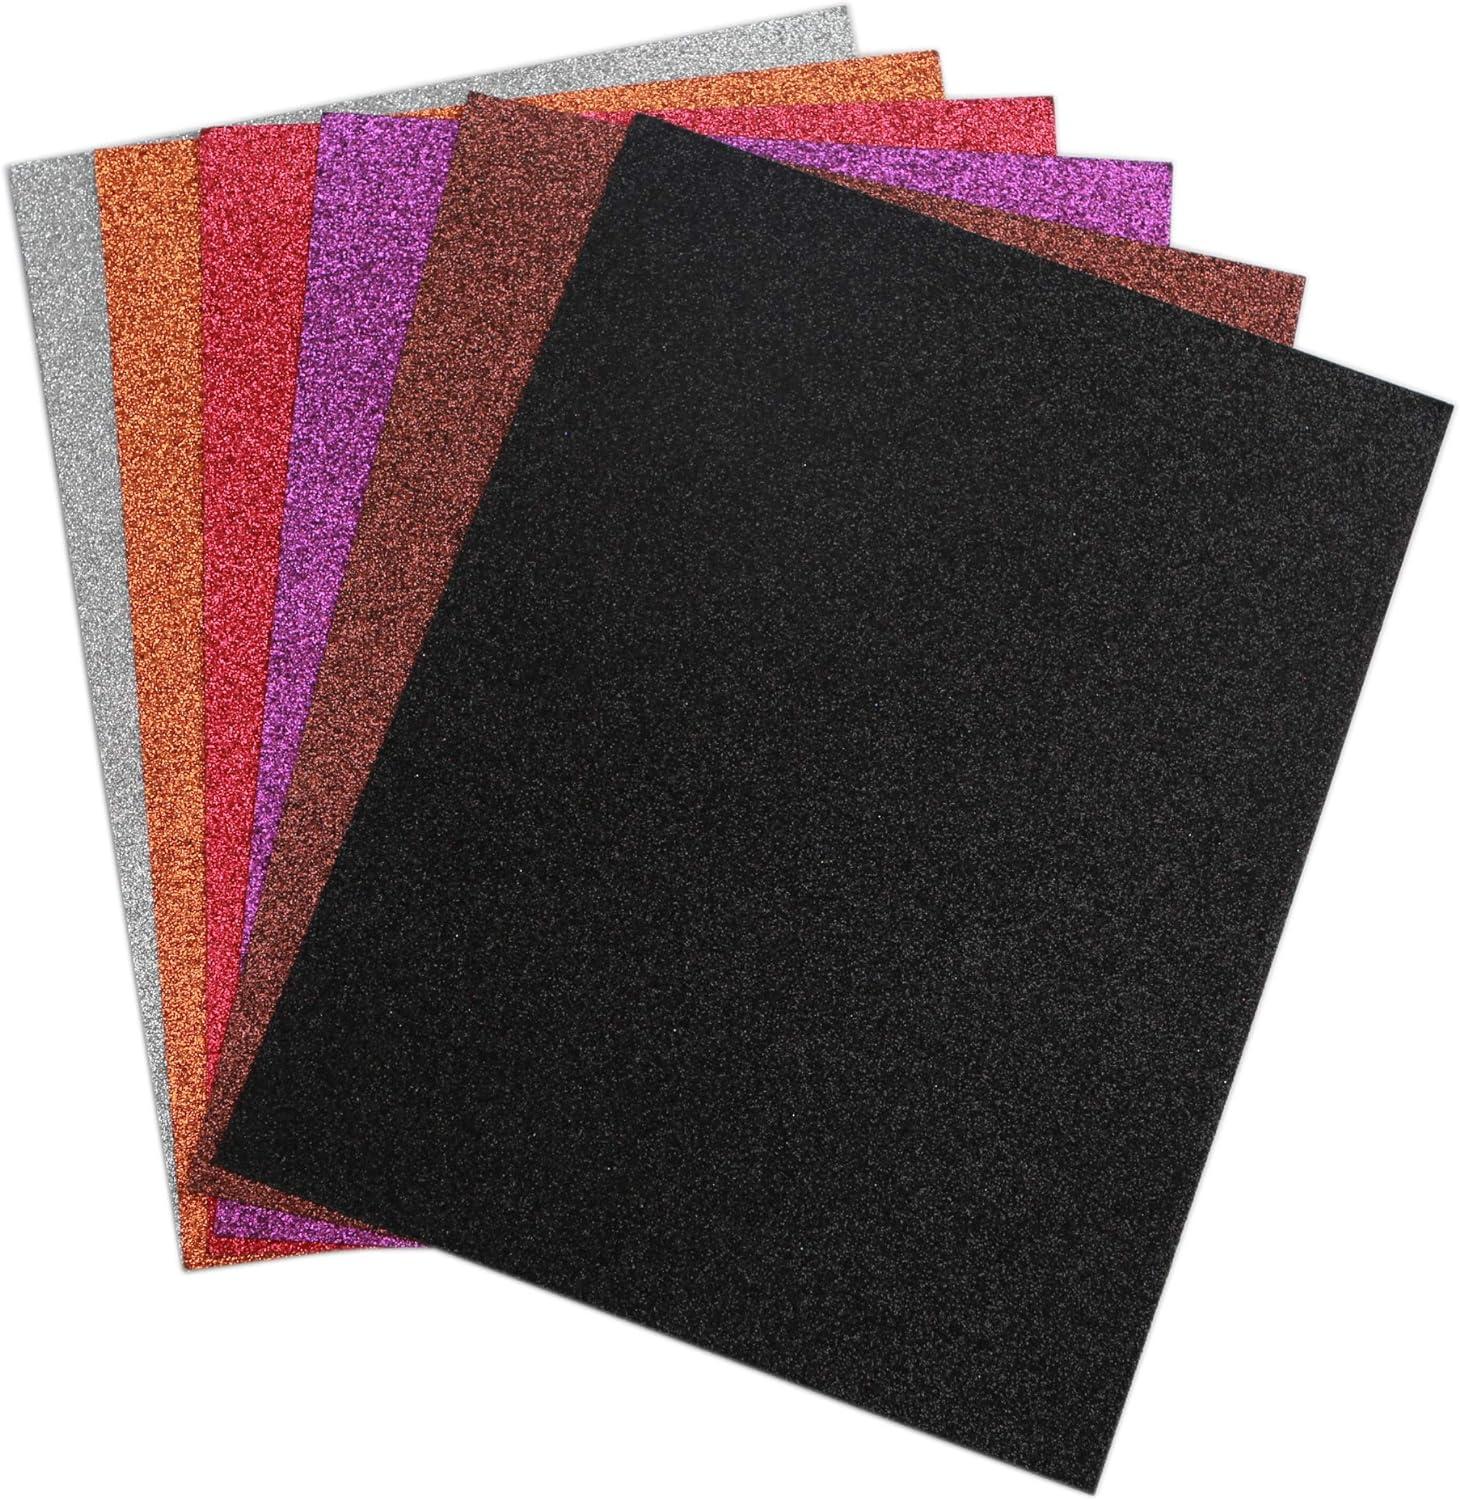 Pink Glitter Cardstock - 10 Sheets Premium Glitter Paper - Sized 12 x 12  - Perfect for Scrapbooking, Crafts, Decorations, Weddings